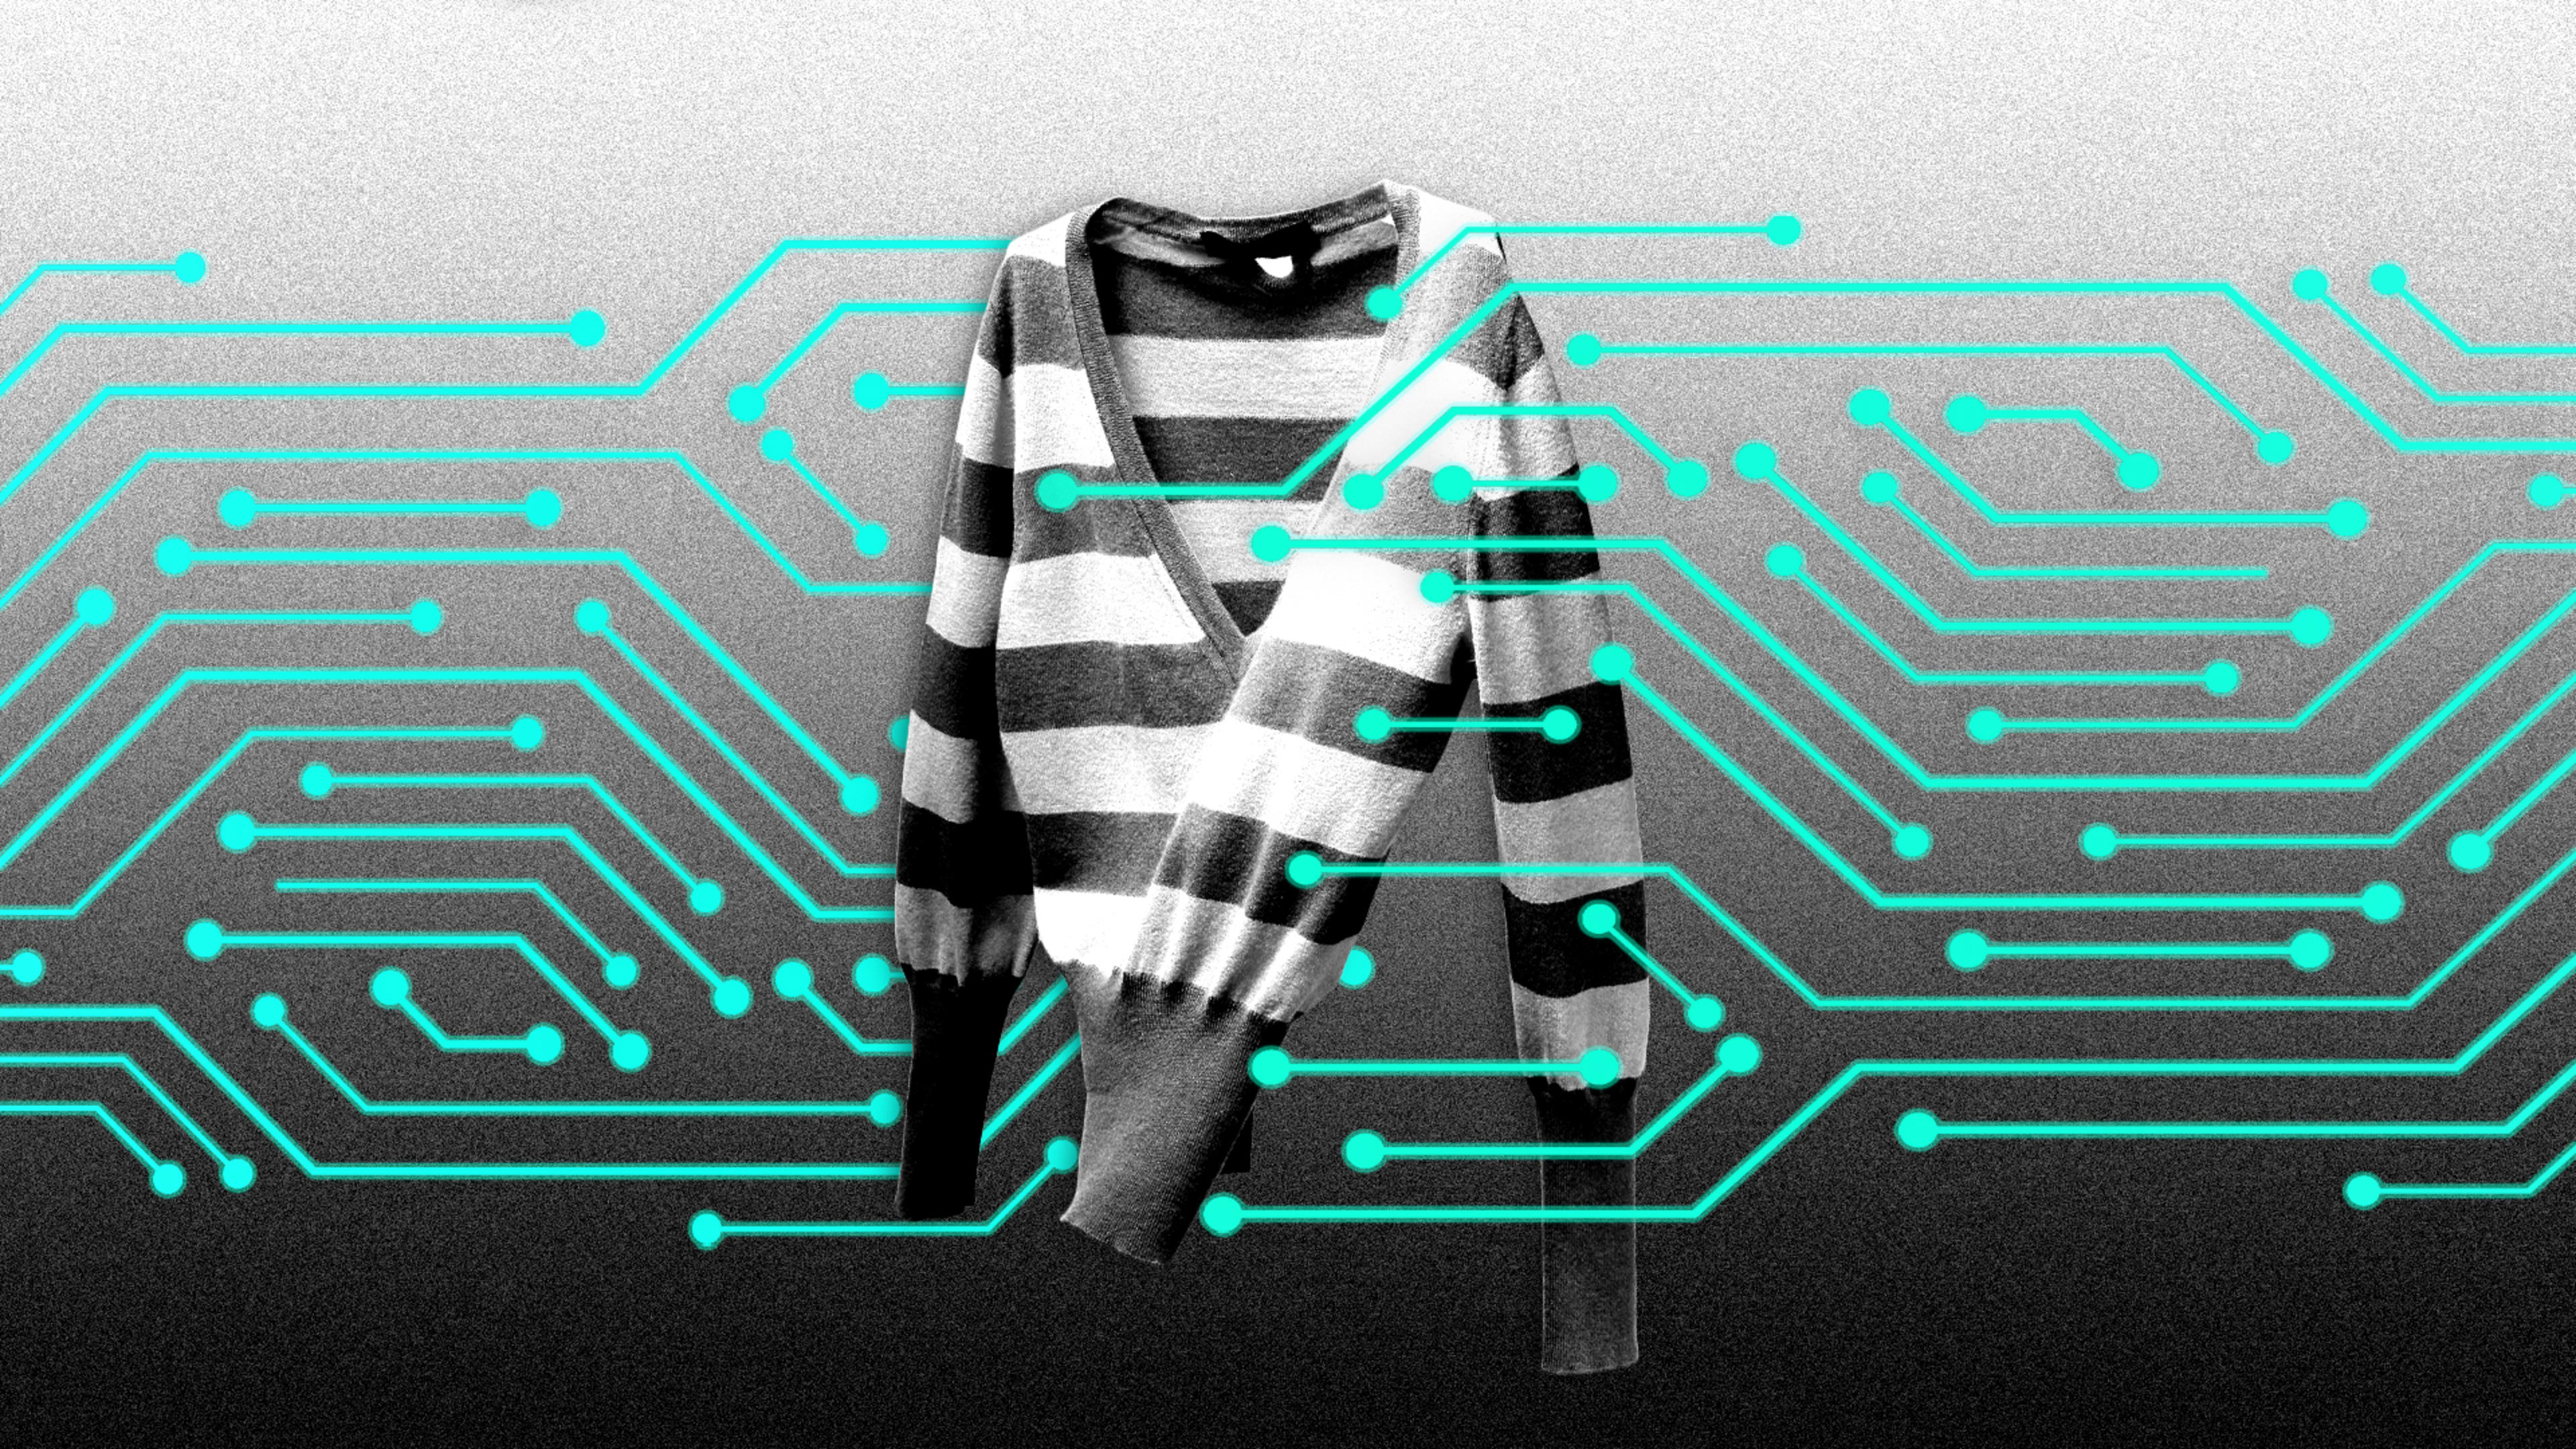 The clothes we wear are about to undergo a wild digital revolution